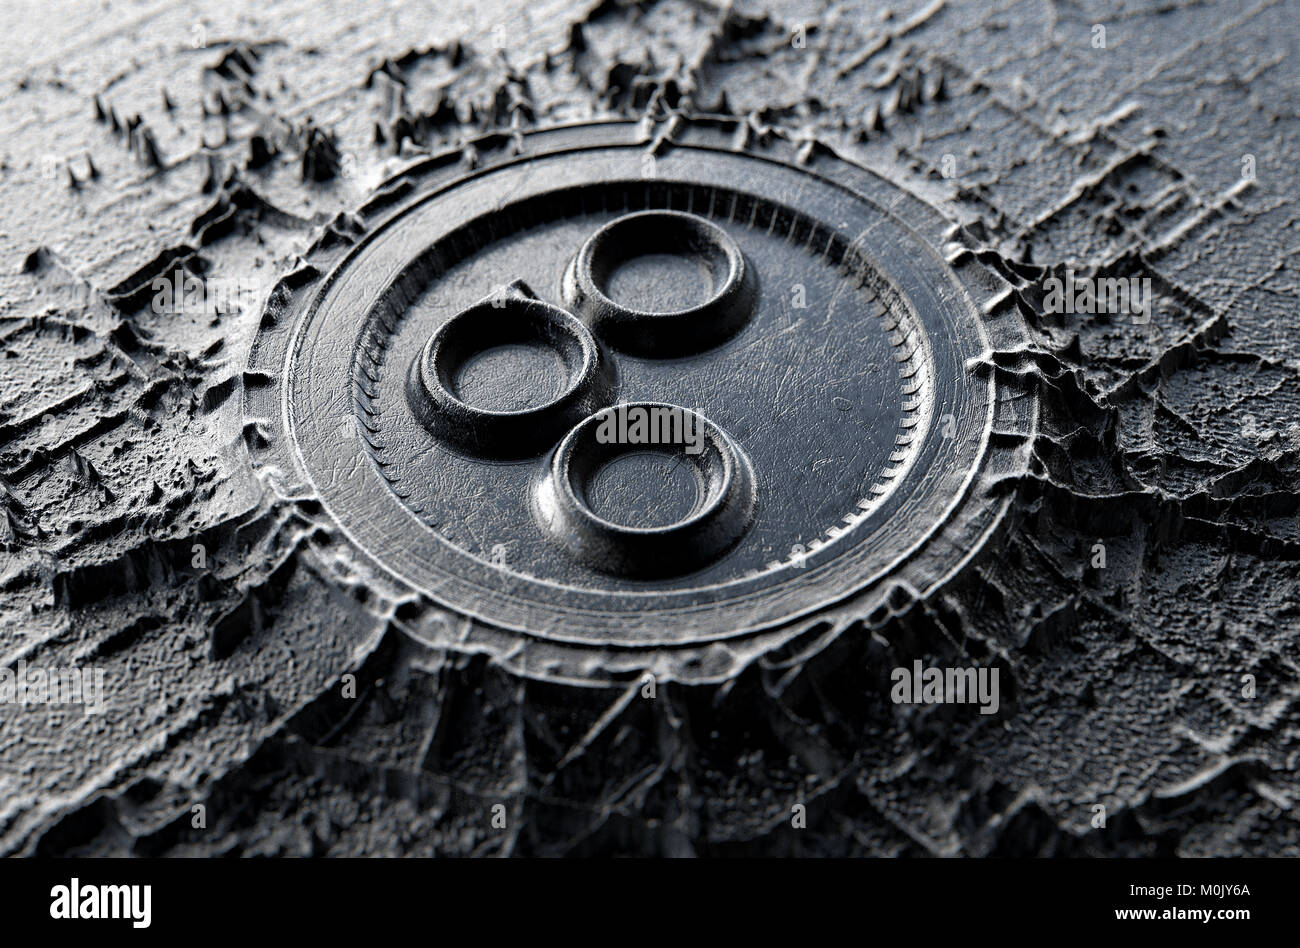 A microscopic closeup concept of cast or mined metal that builds up to form a physical omisego cryptocurrency symbol - 3D render Stock Photo